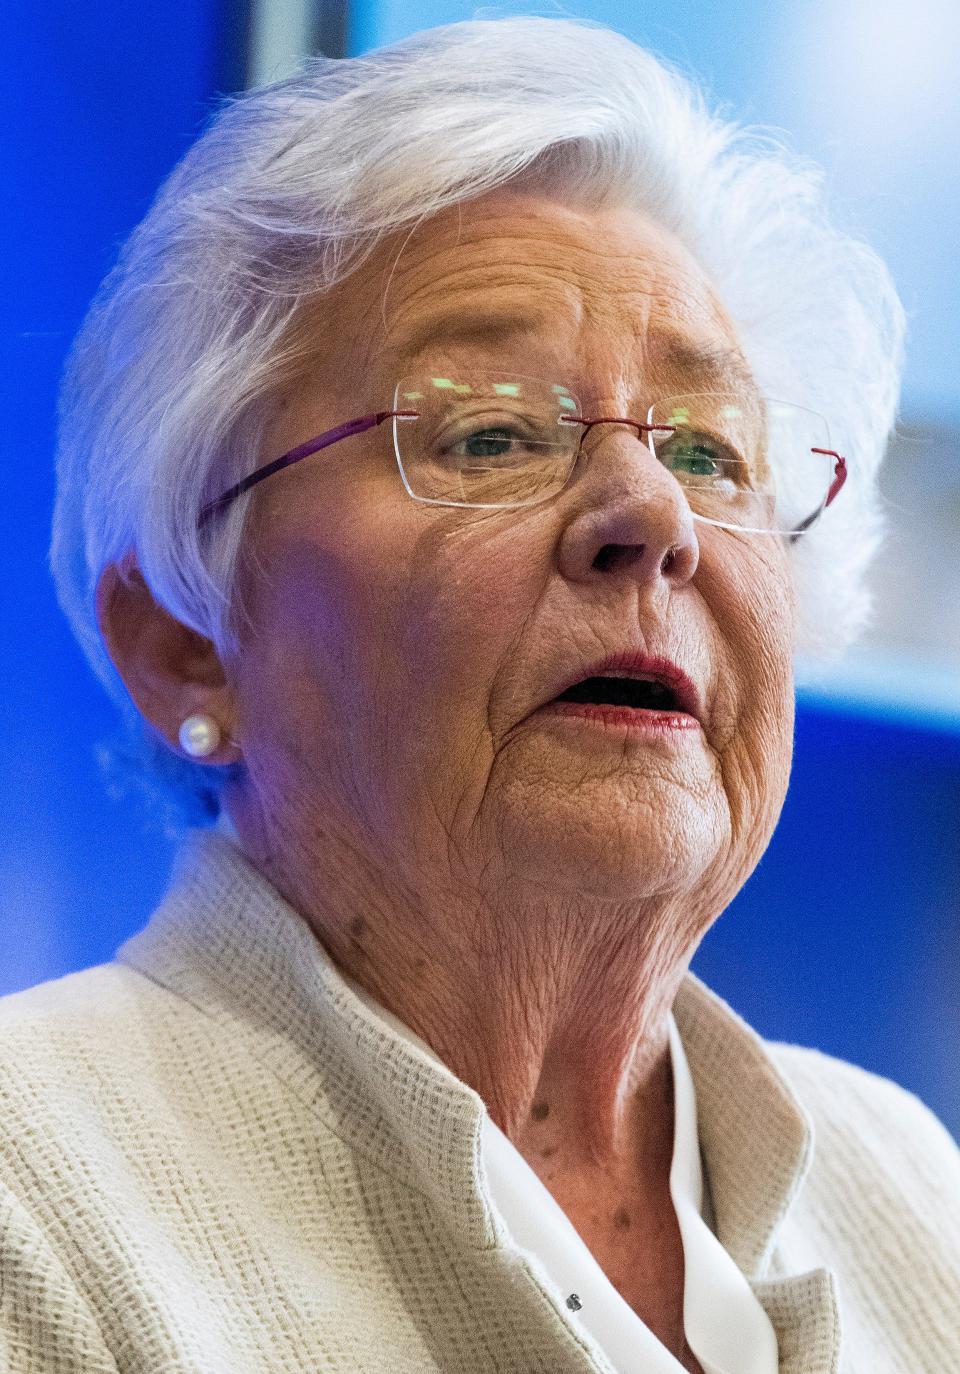 Gov. Kay Ivey, shown here in October 2022, said she made her decision in consideration of victims' loved ones who await executions, seeking closure and justice.